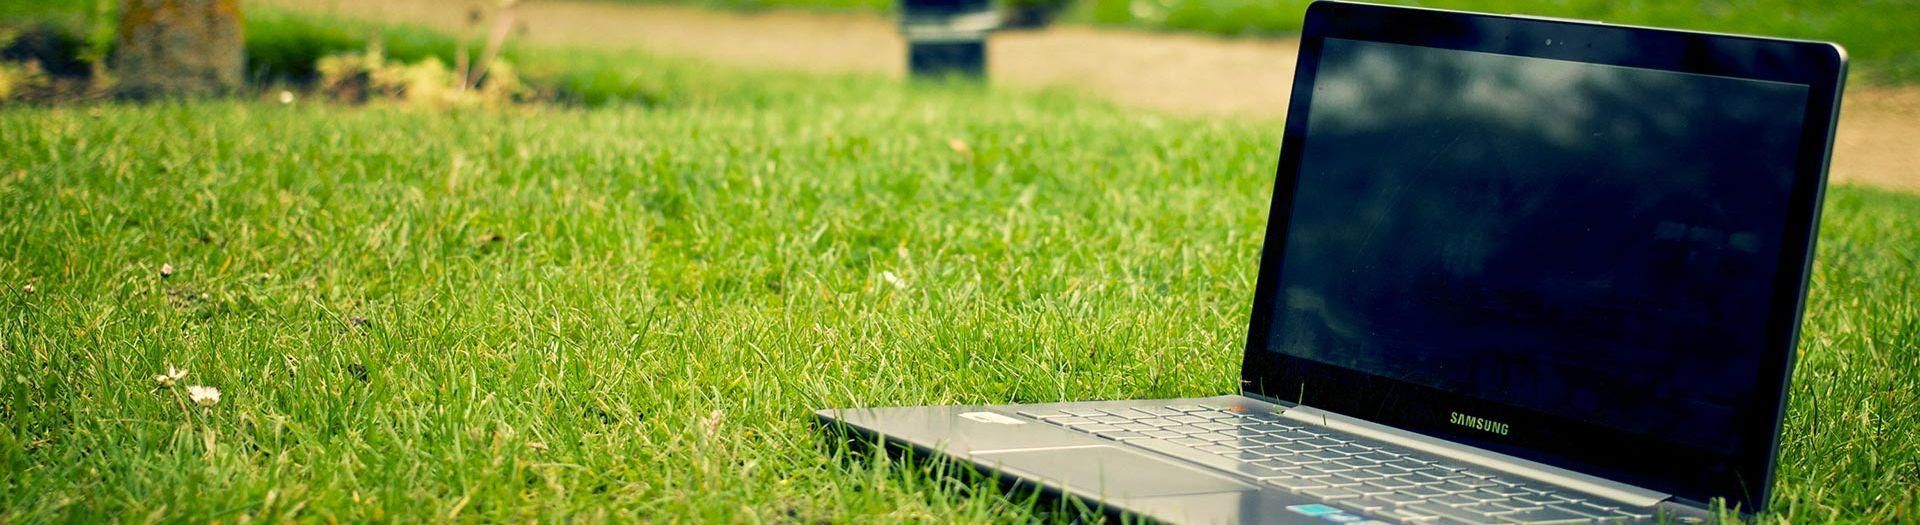 laptop-notebook-grass-meadow-1c6fa79c Scan | BRIGHT Software B.V.